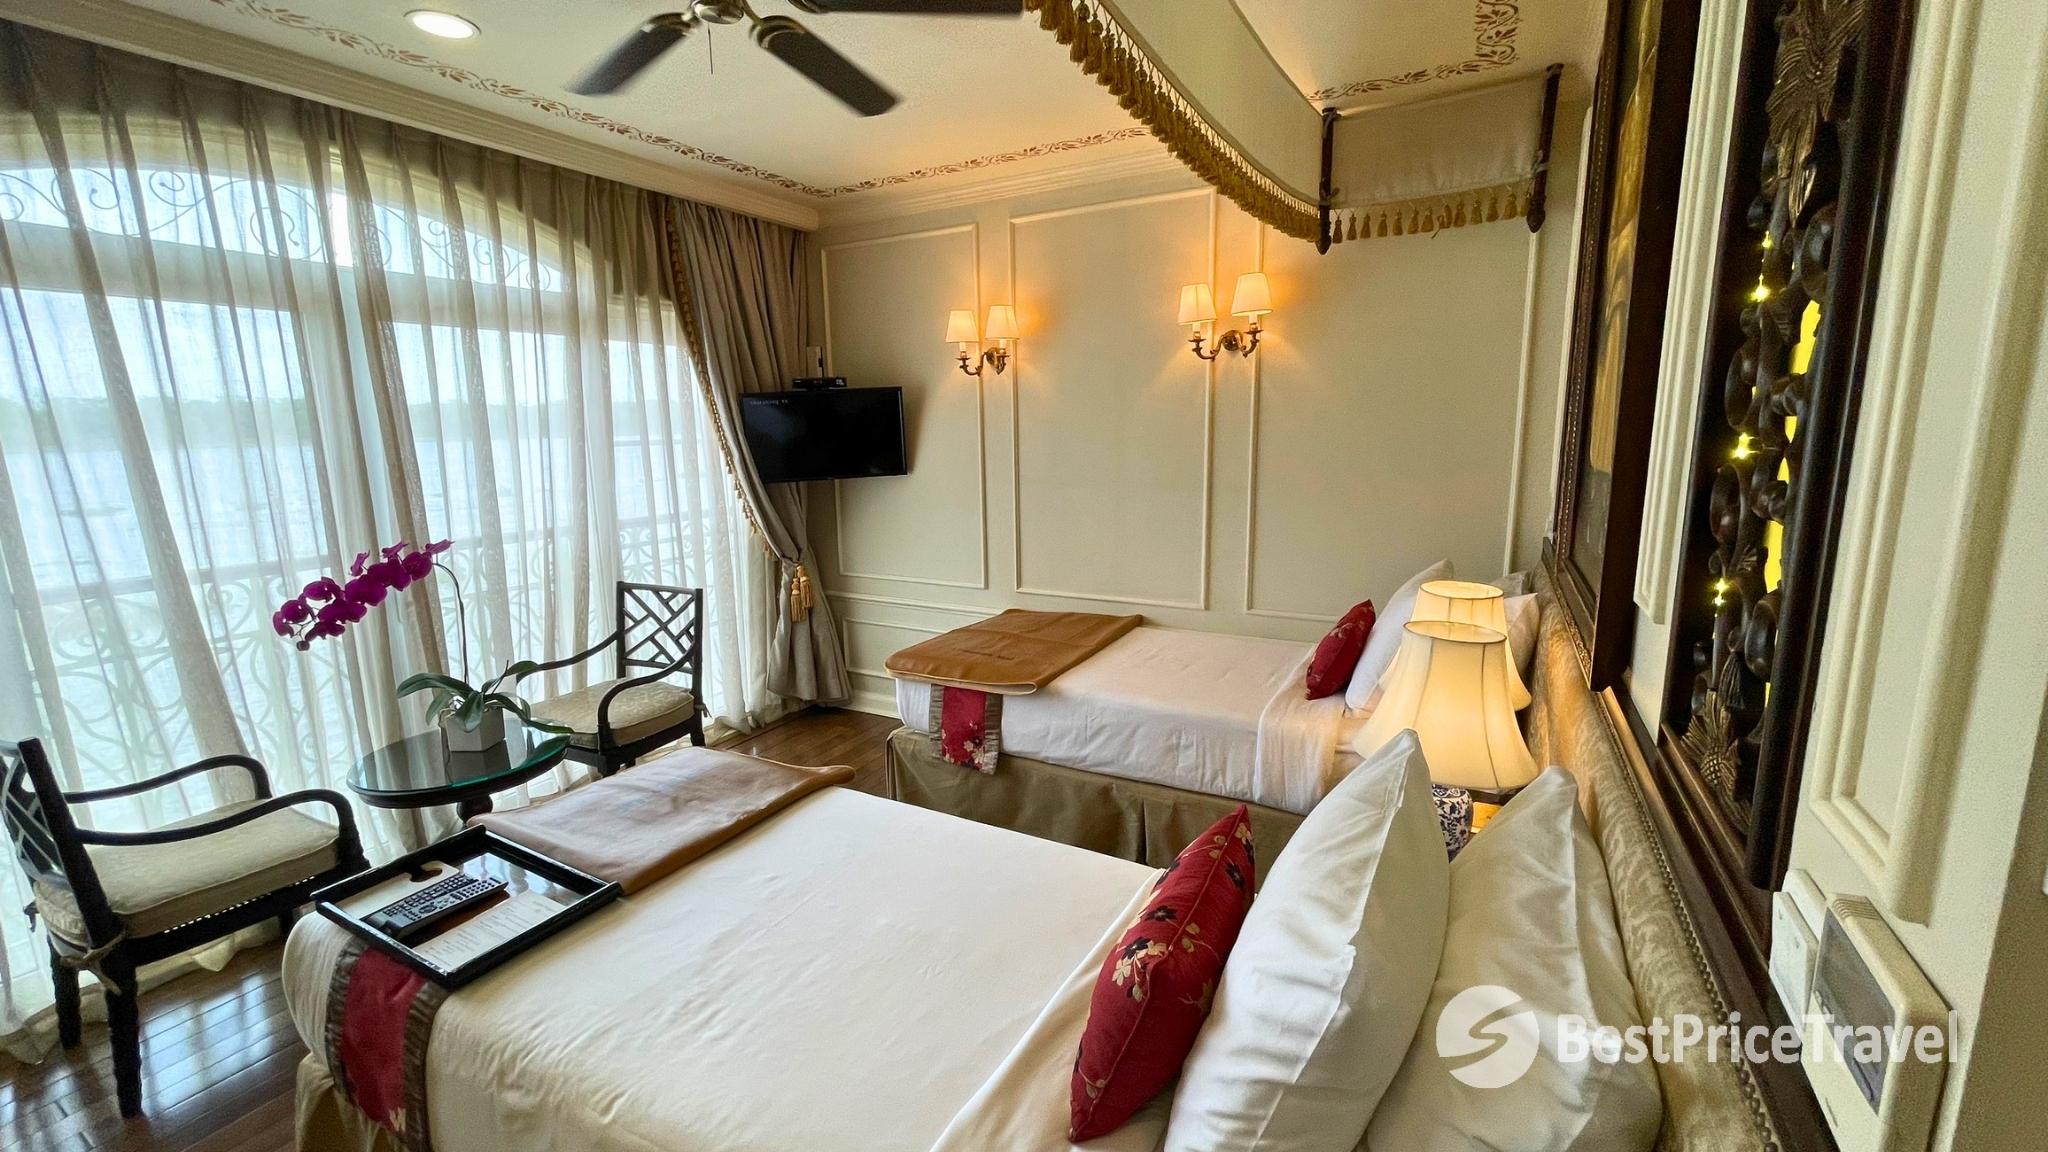 Comfortable Room With Cozy And Royal Vibe